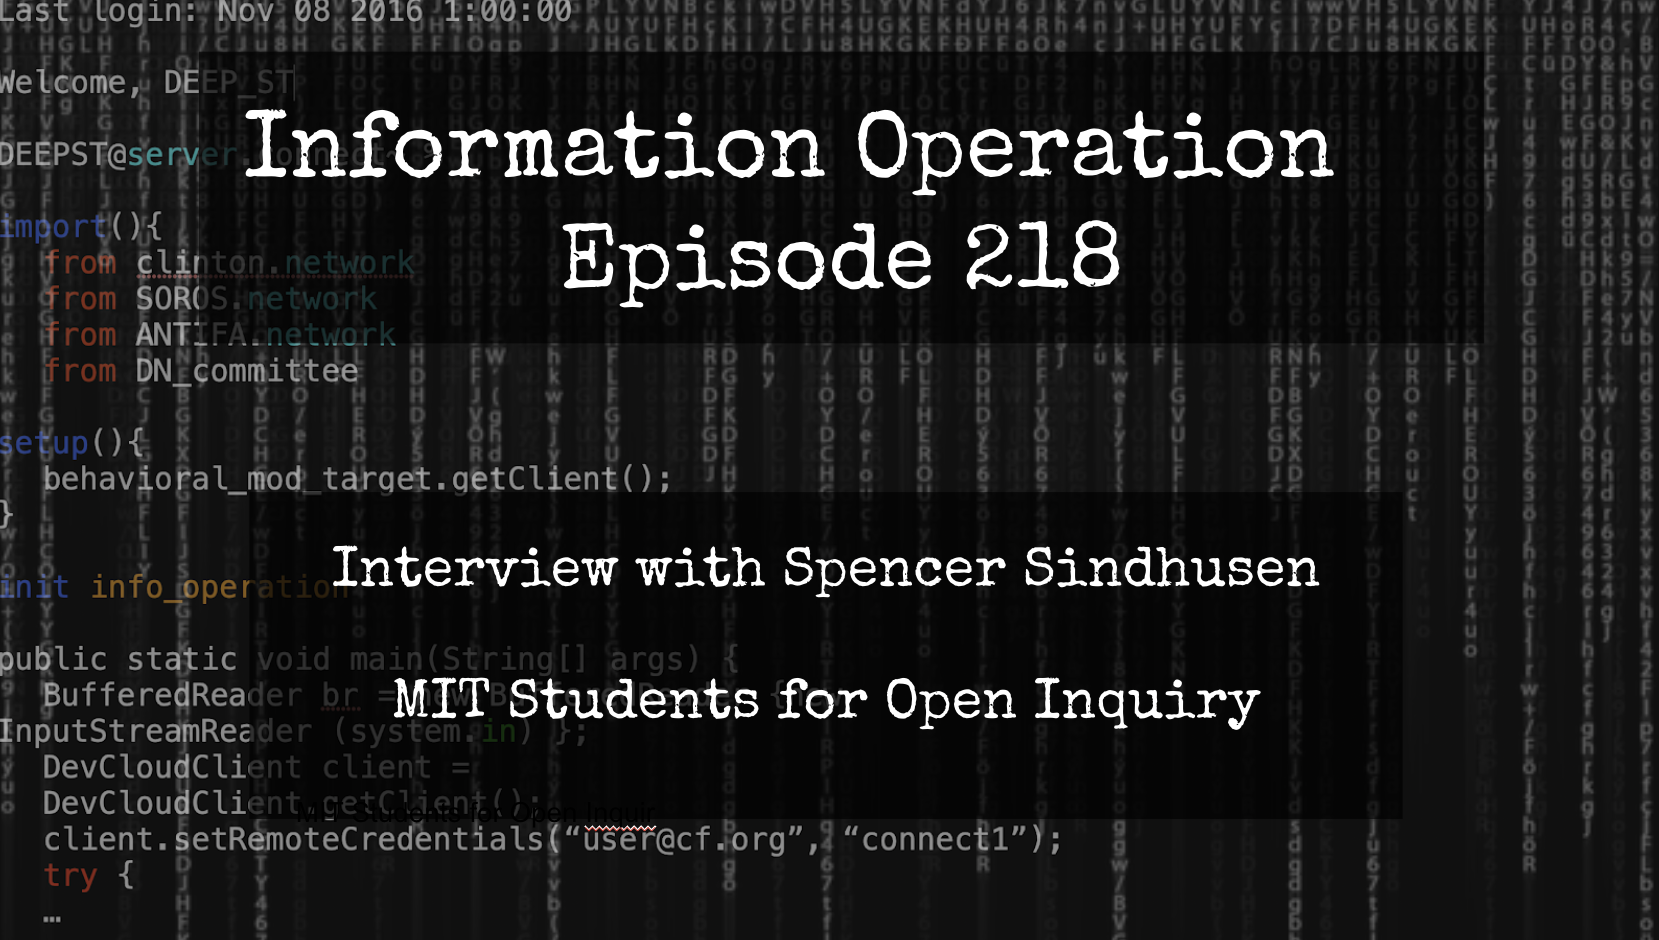 LIVE 7pm EST: IO Episode 218 - MIT Students Stand Up For Free Speech